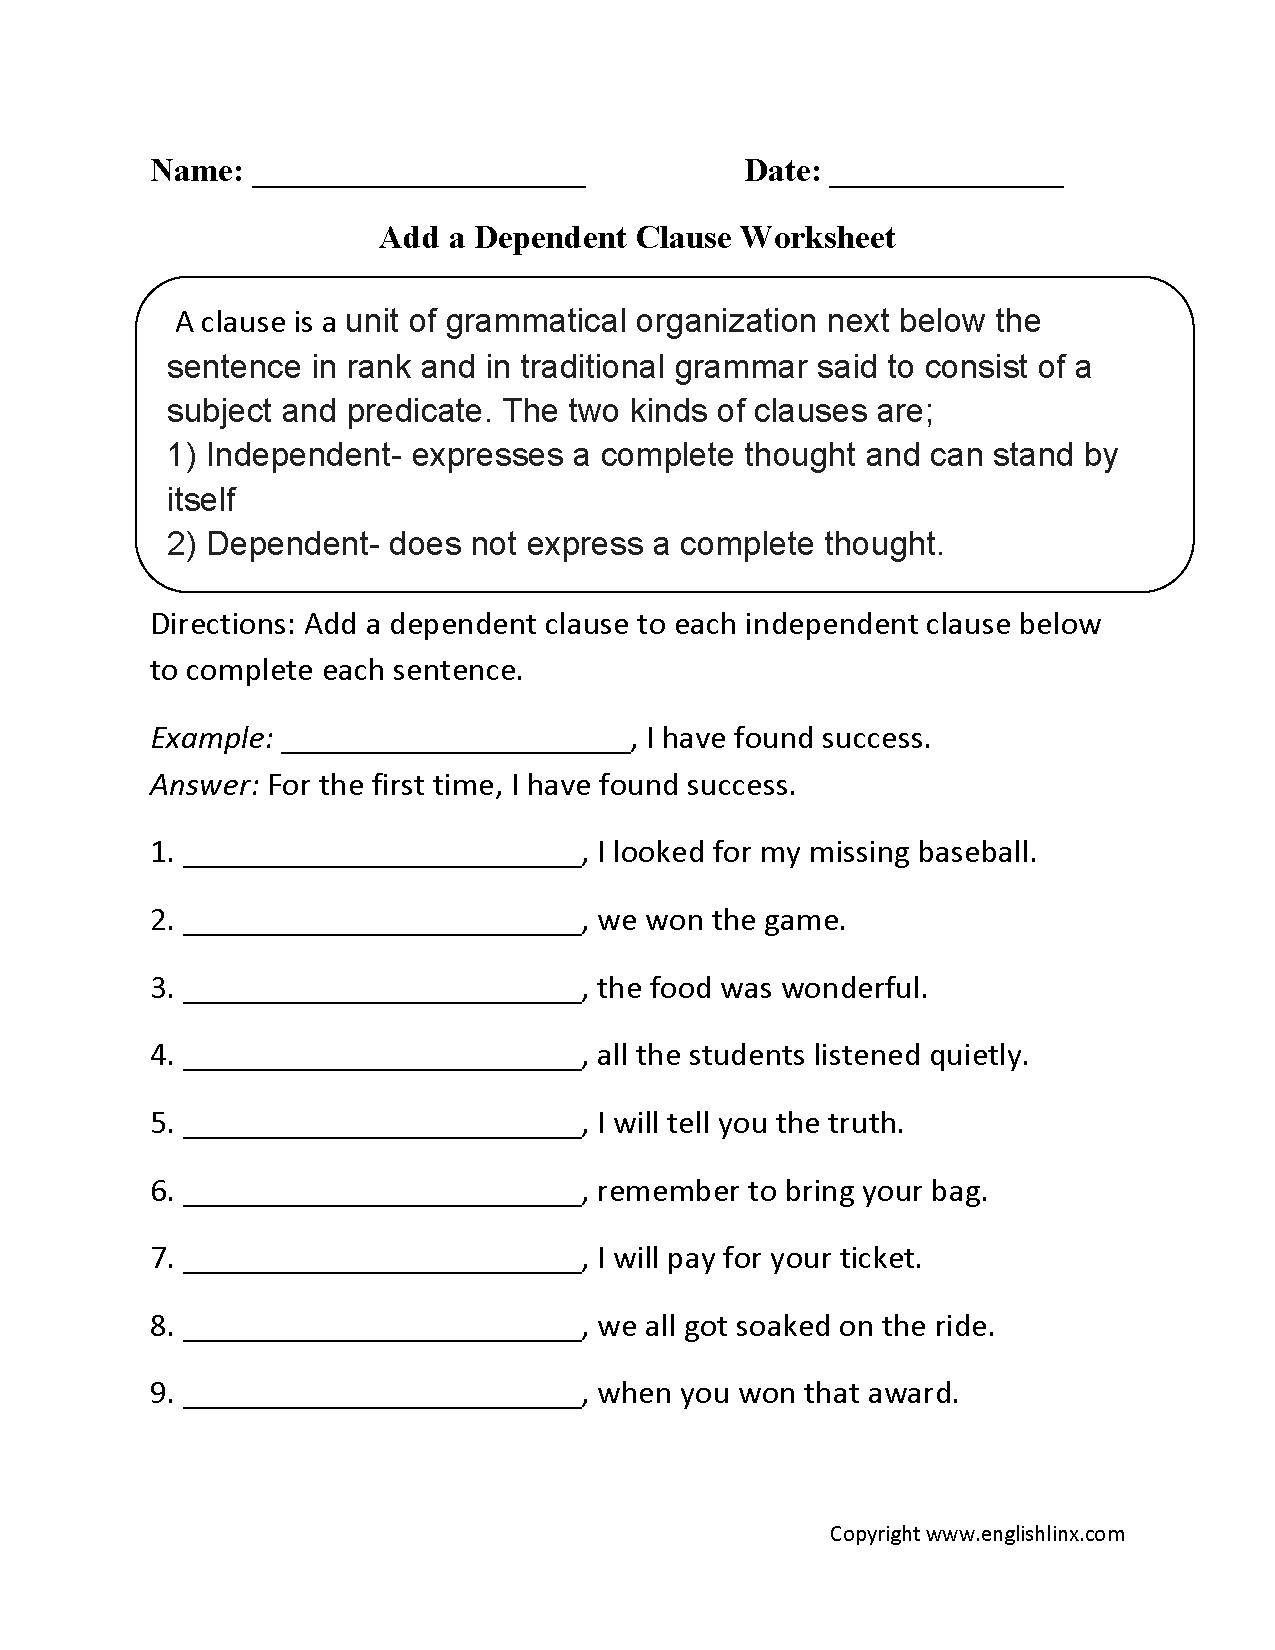 Add Dependent Clause Worksheets